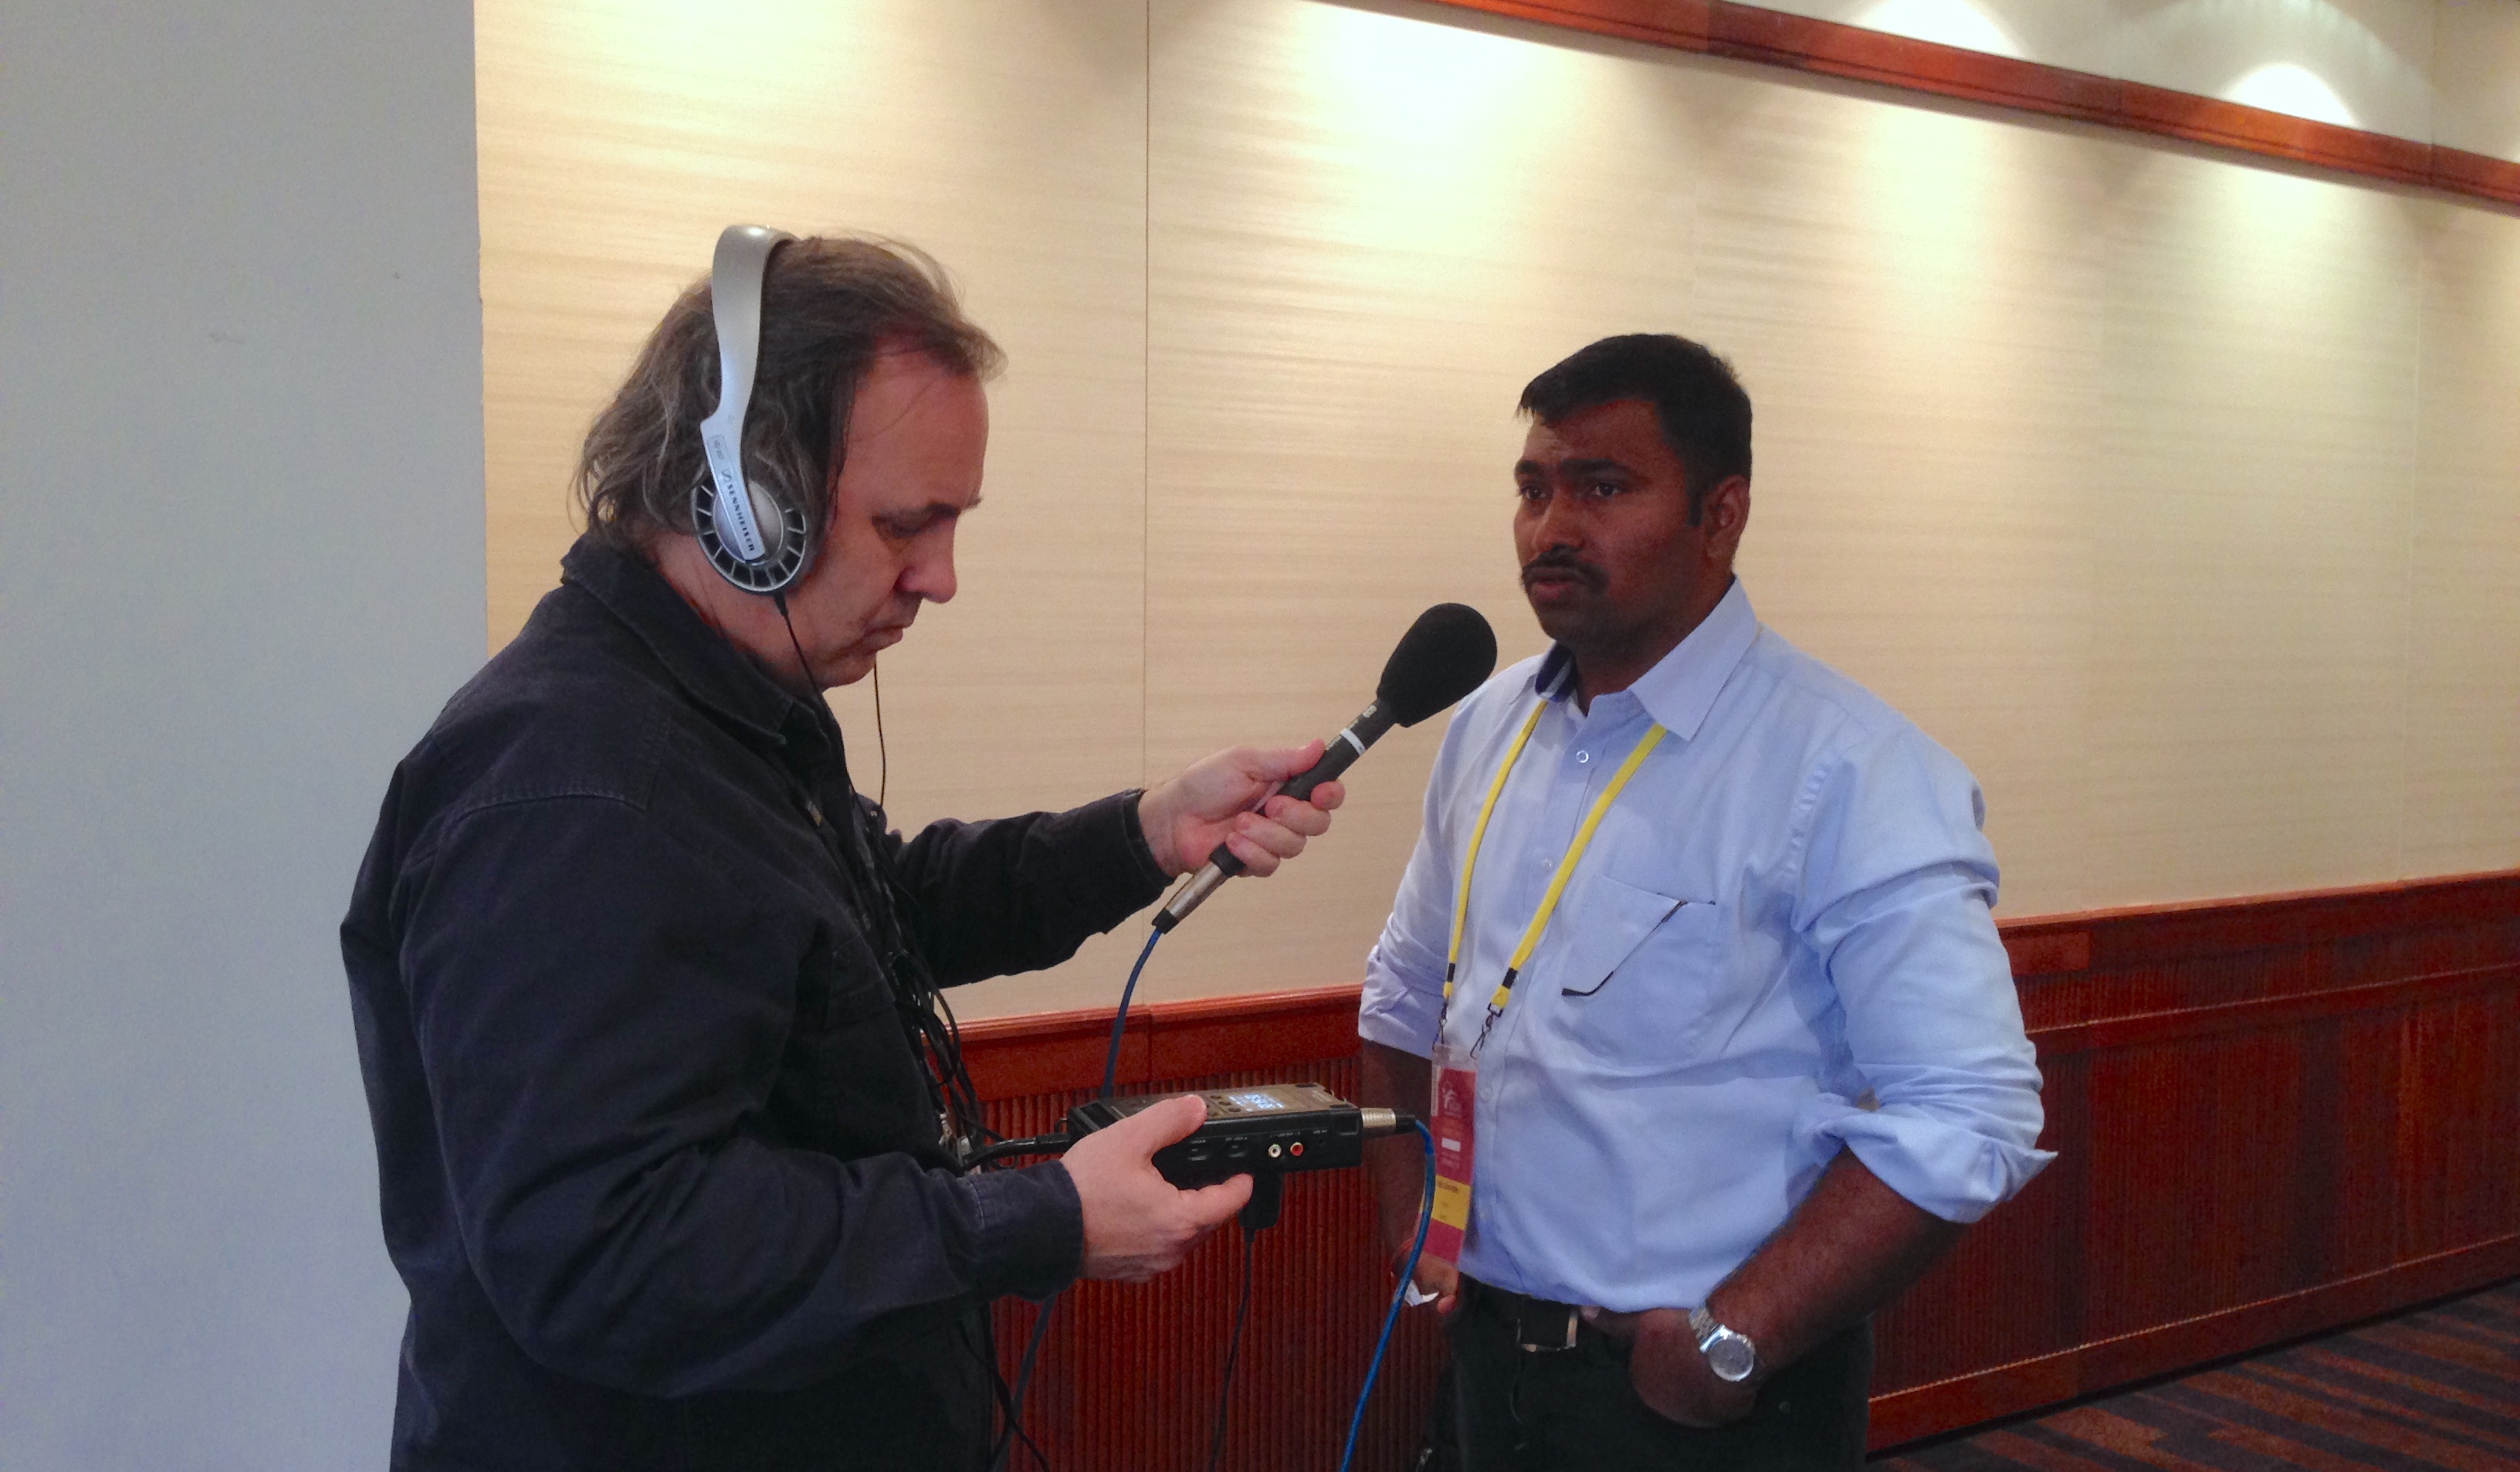 CIMMYT scientist Velu Govindan (right) is interviewed by Michael Condon of ABC Rural at the International Wheat Conference in Sydney, Australia, 2015. (Photo: Julie Mollins/CIMMYT)